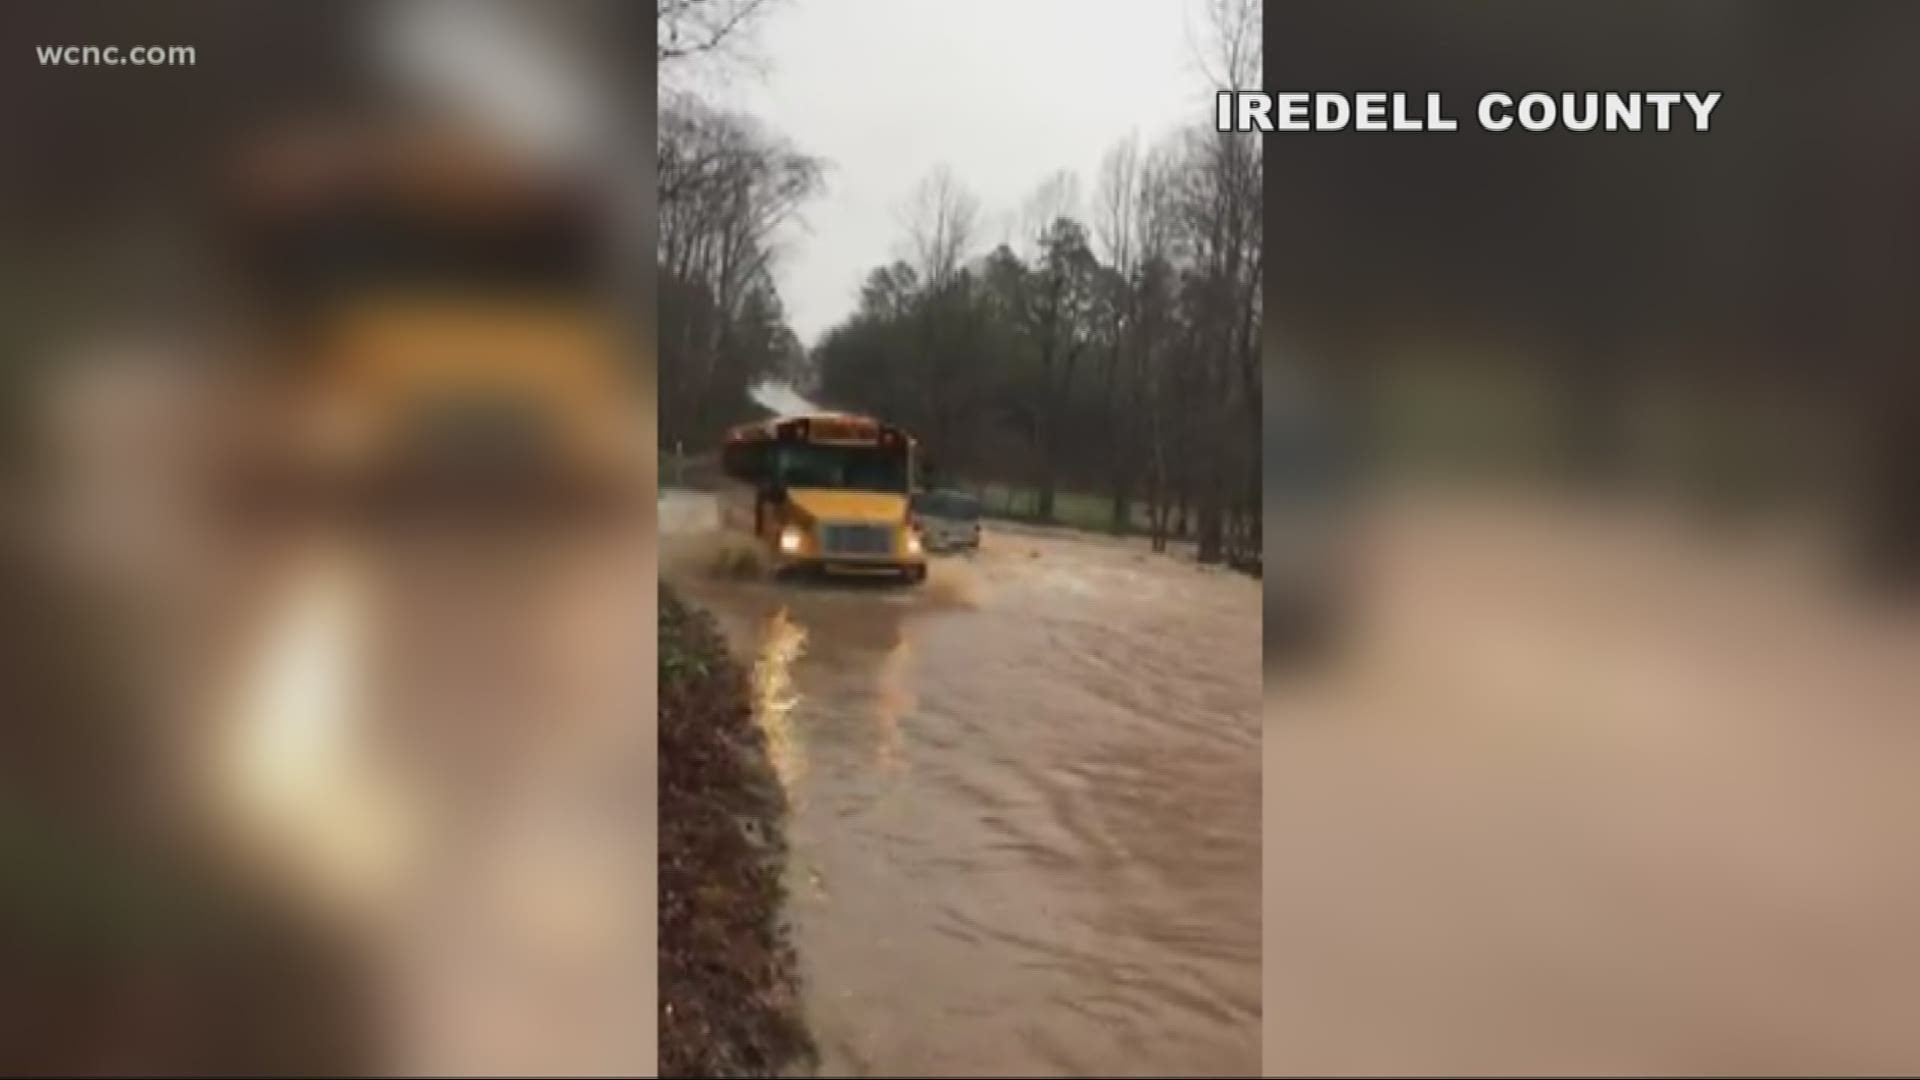 A bus from Troutman Elementary School in Iredell County drove through floodwaters and the video has many parents outraged.